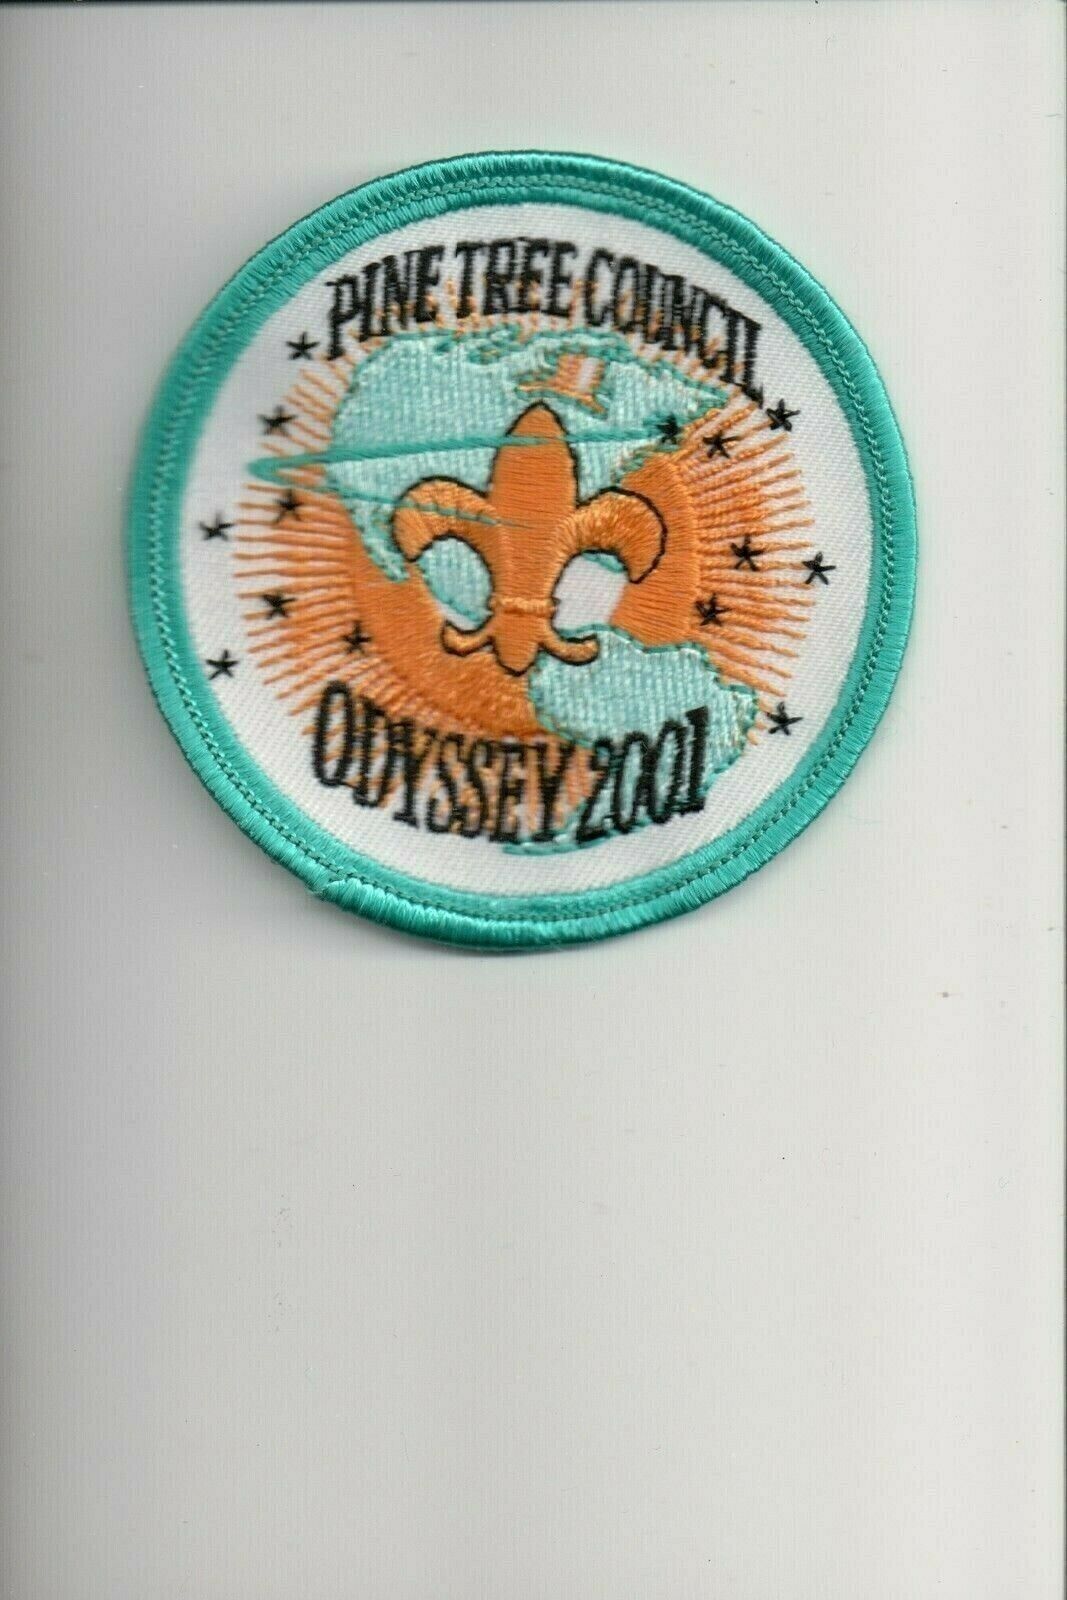 2001 Pine Tree Council Odyssey patch